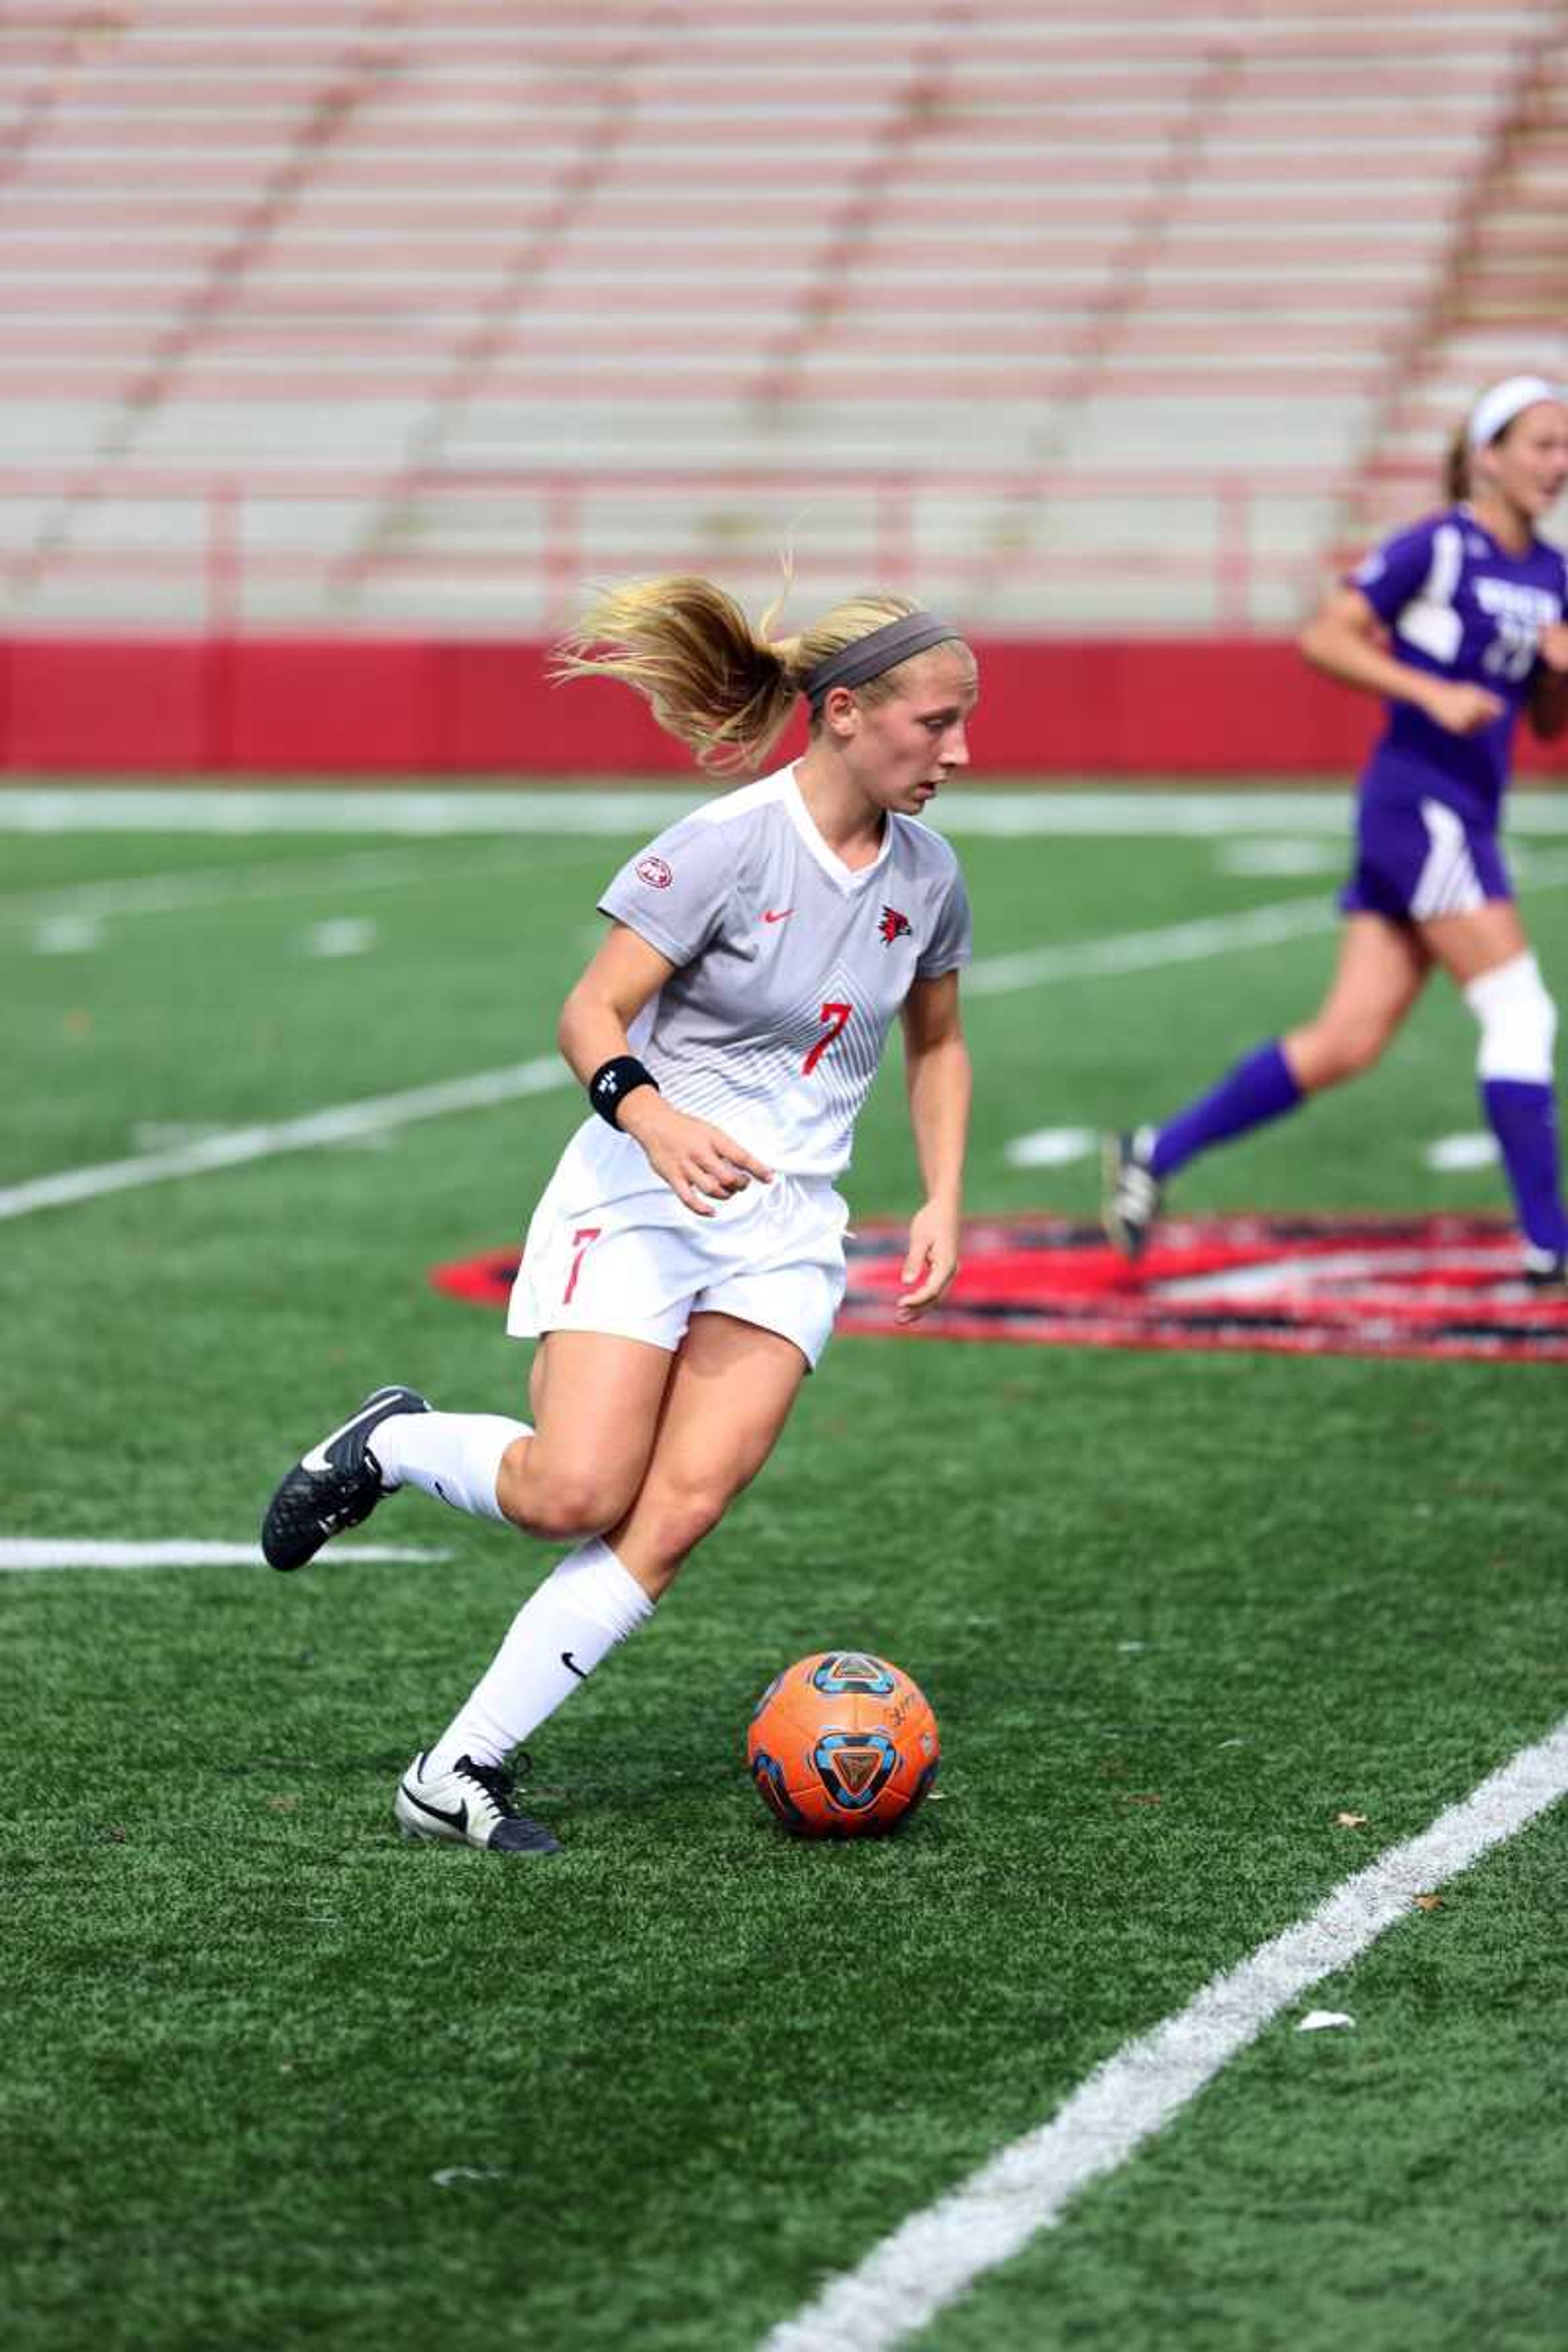 Freshman forward/defender Lauren Kaempfe takes the ball down the field in Southeast's women's soccer match against Tennessee Tech on Oct. 25 at Houck Stadium.